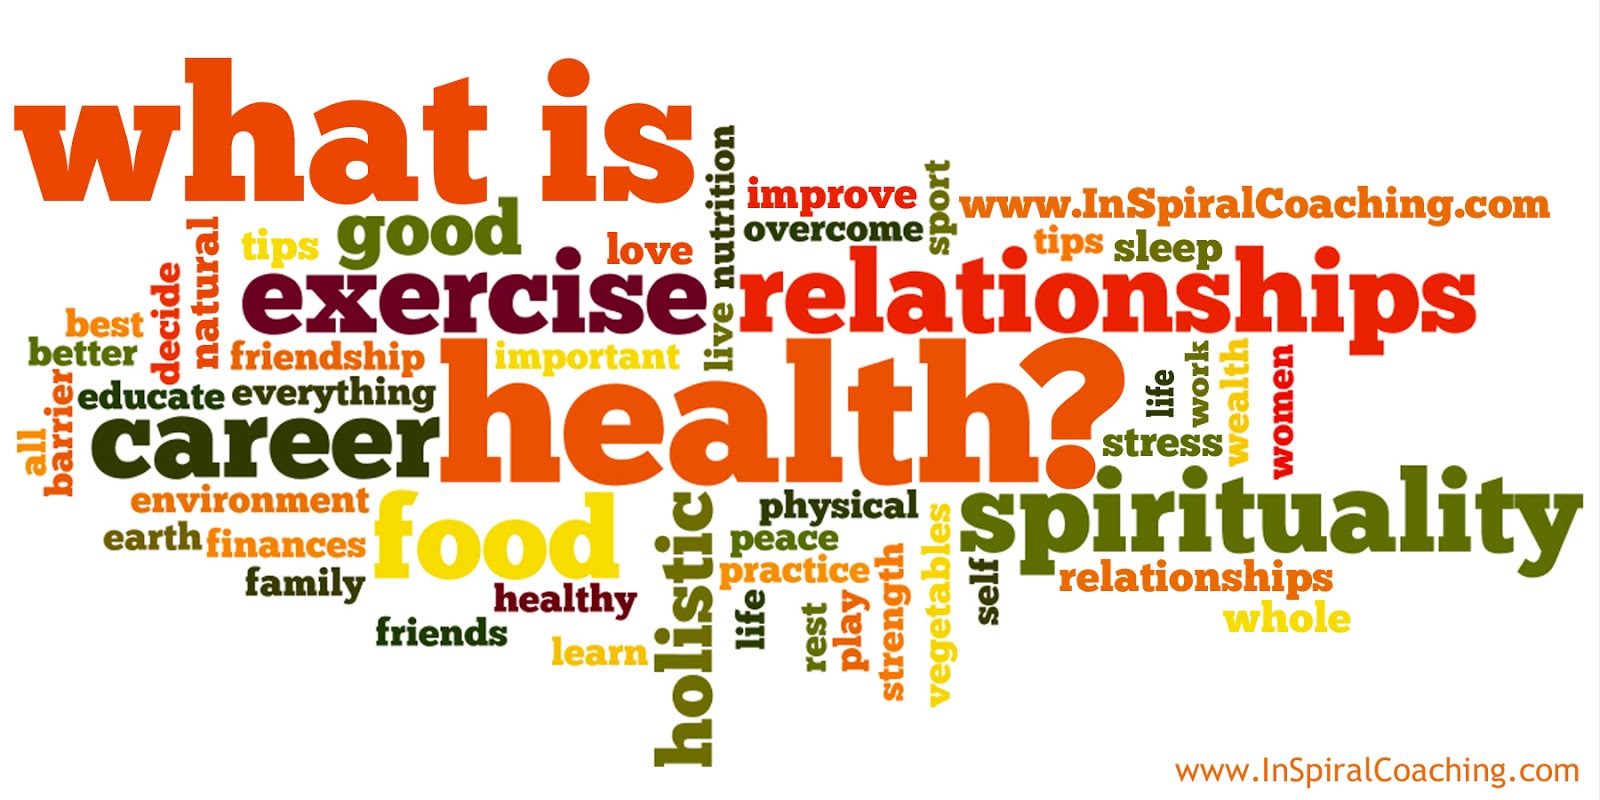 InSpiral Coaching: What does healthy really mean? (Part 4 - Exercise)